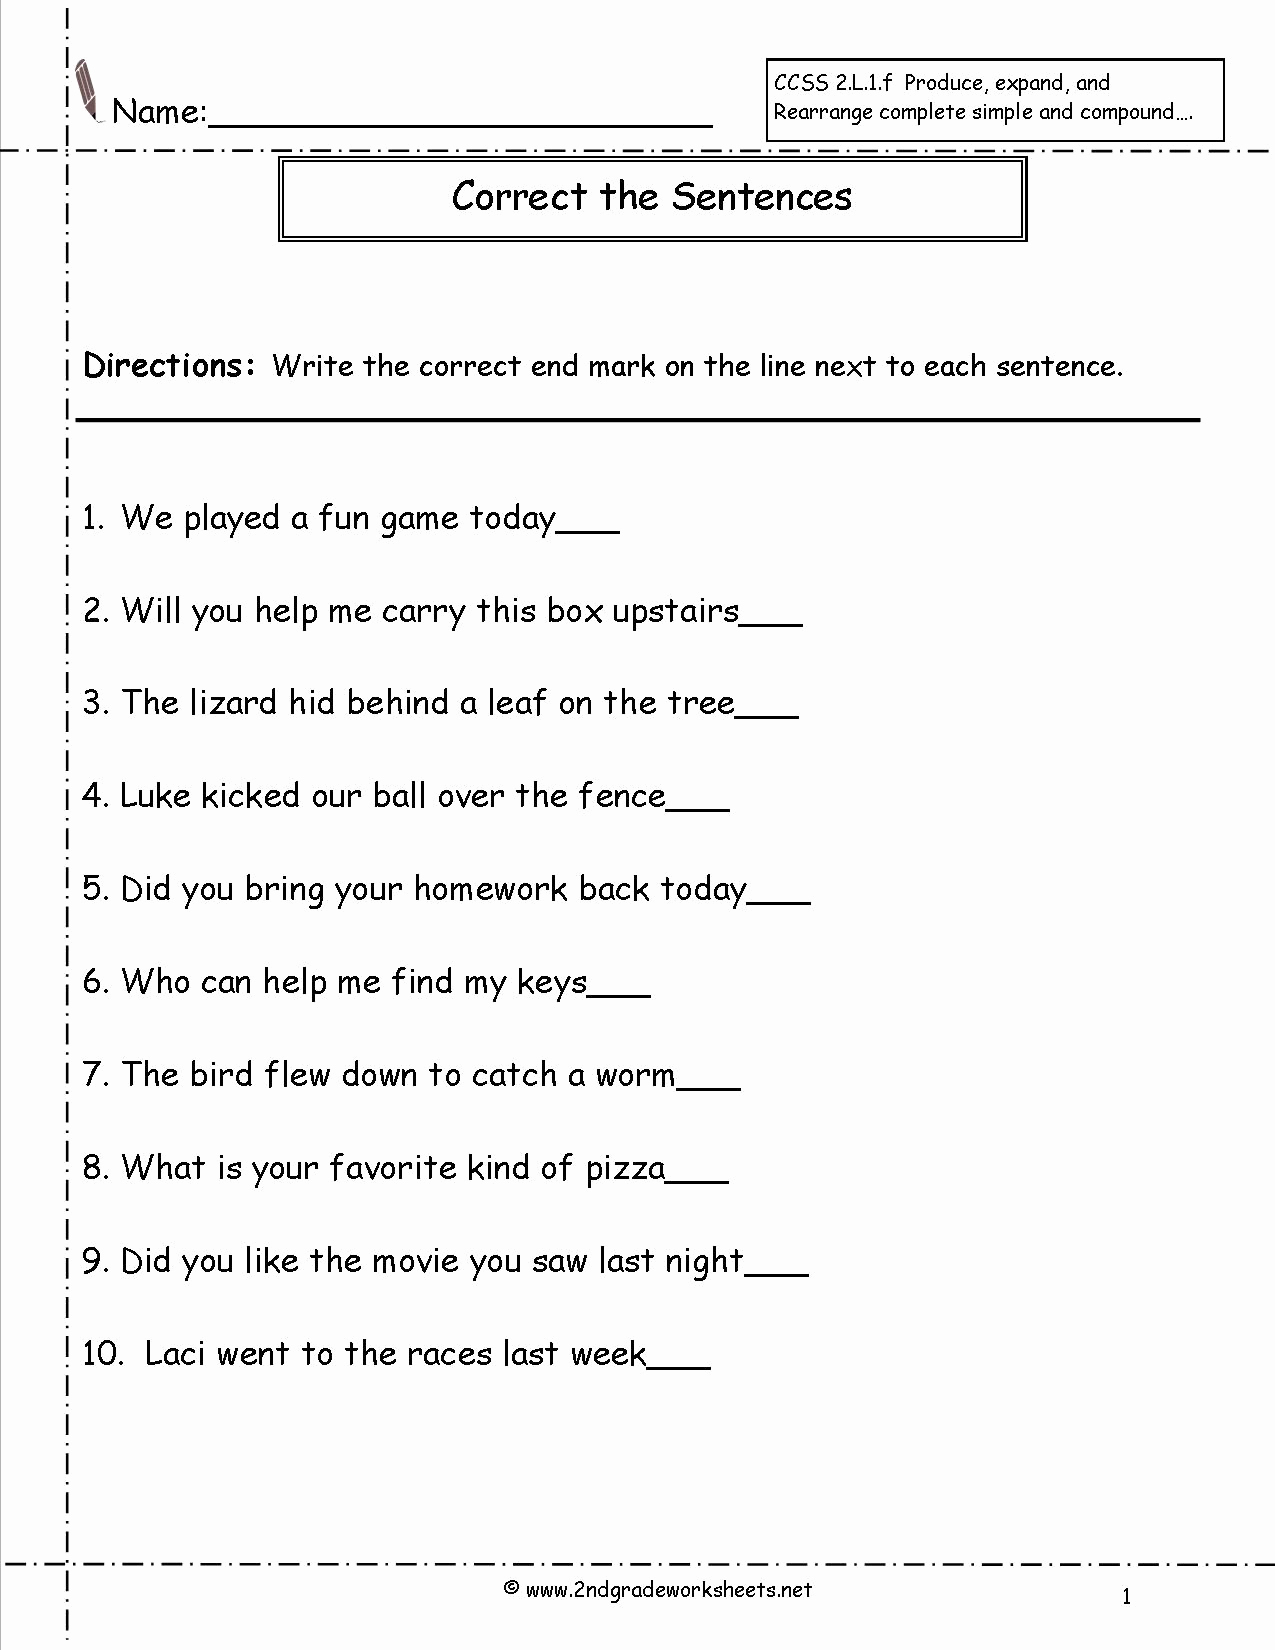 Making Inferences Worksheets 4th Grade Unique 20 Inference Worksheets 4th Grade